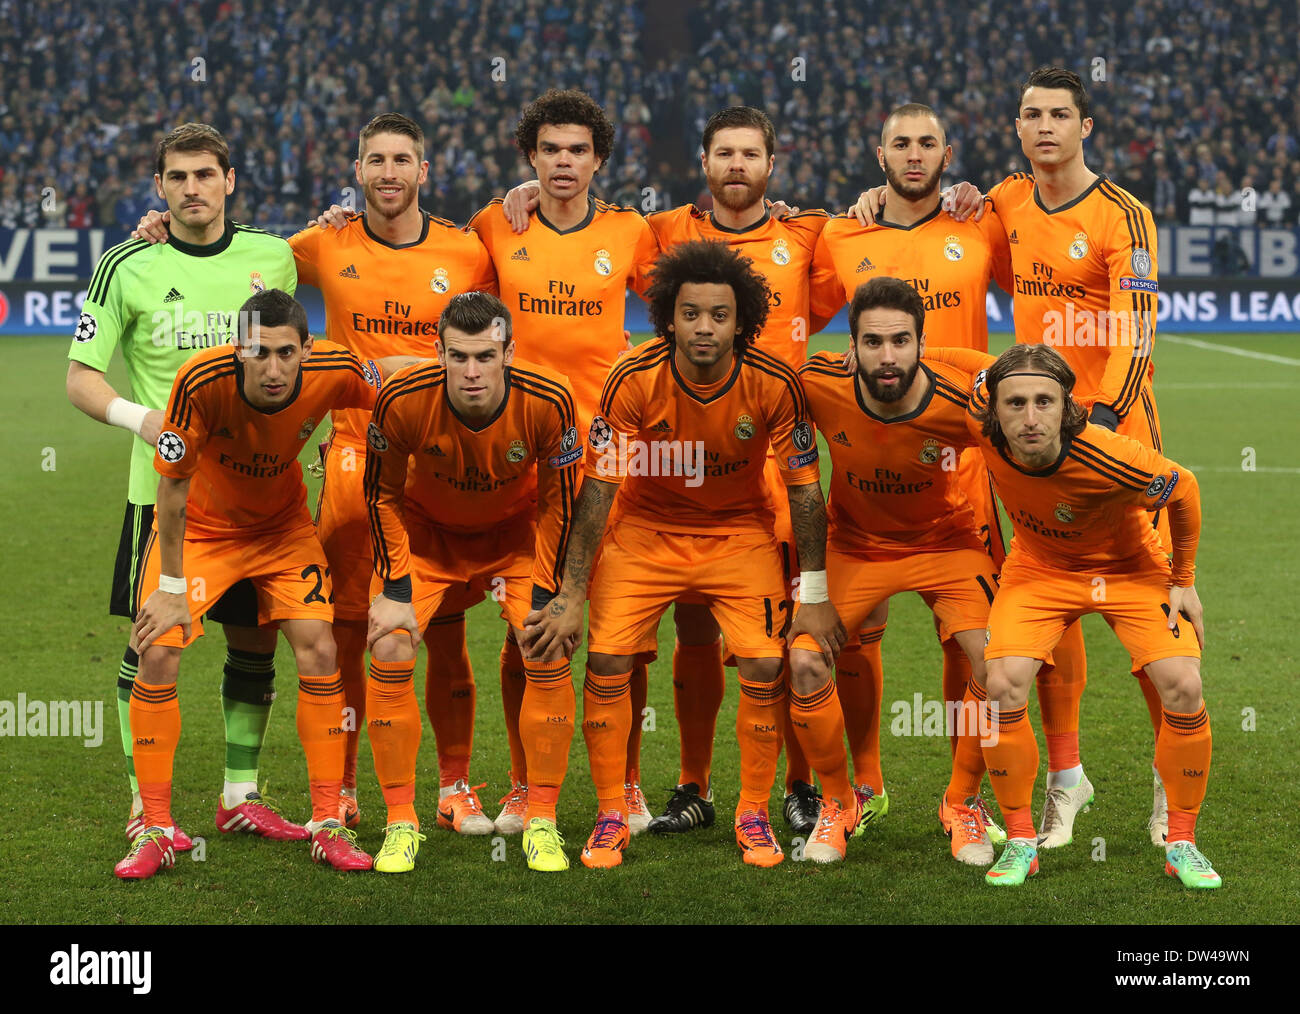 Gelsenkirchen, Germany. 26th Feb, 2014. The team of Madrid poses prior to the UEFA Champions League round of 16 first leg soccer match between FC Schalke 04 - Real Madrid at the Veltins-Arena in Gelsenkirchen, Germany, 26 February 2014. Front row (l-r): Angel di Maria, Gareth Bale, Marcelo, Daniel Carvajal and Luka Modric. Second row (l-r): Iker Casillas, Sergio Ramos, Pepe, Xabi Alonso, Karim Benzema and Cristiano Ronaldo. Photo: Roland Weihrauch/dpa/Alamy Live News Stock Photo